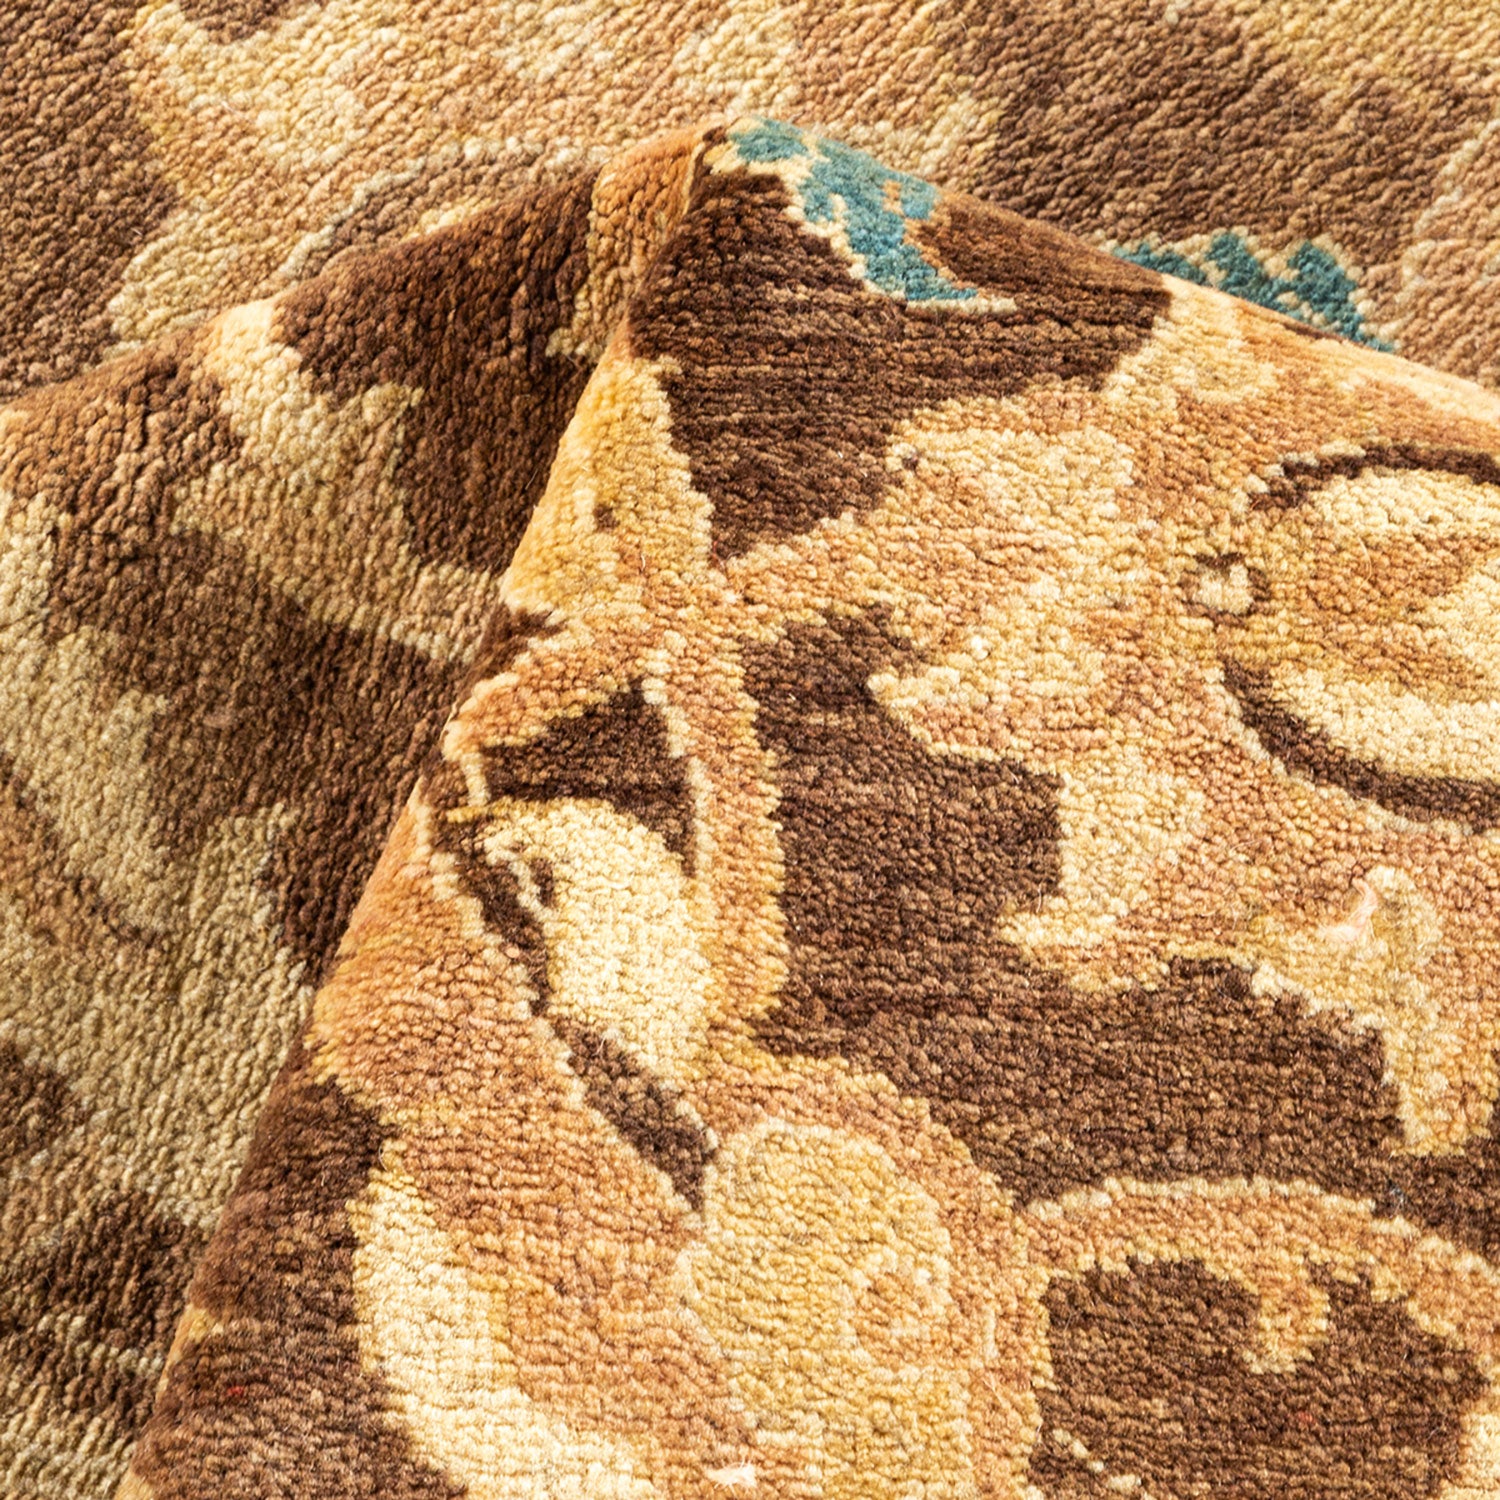 Close-up view of a plush, textured carpet with intricate floral pattern.